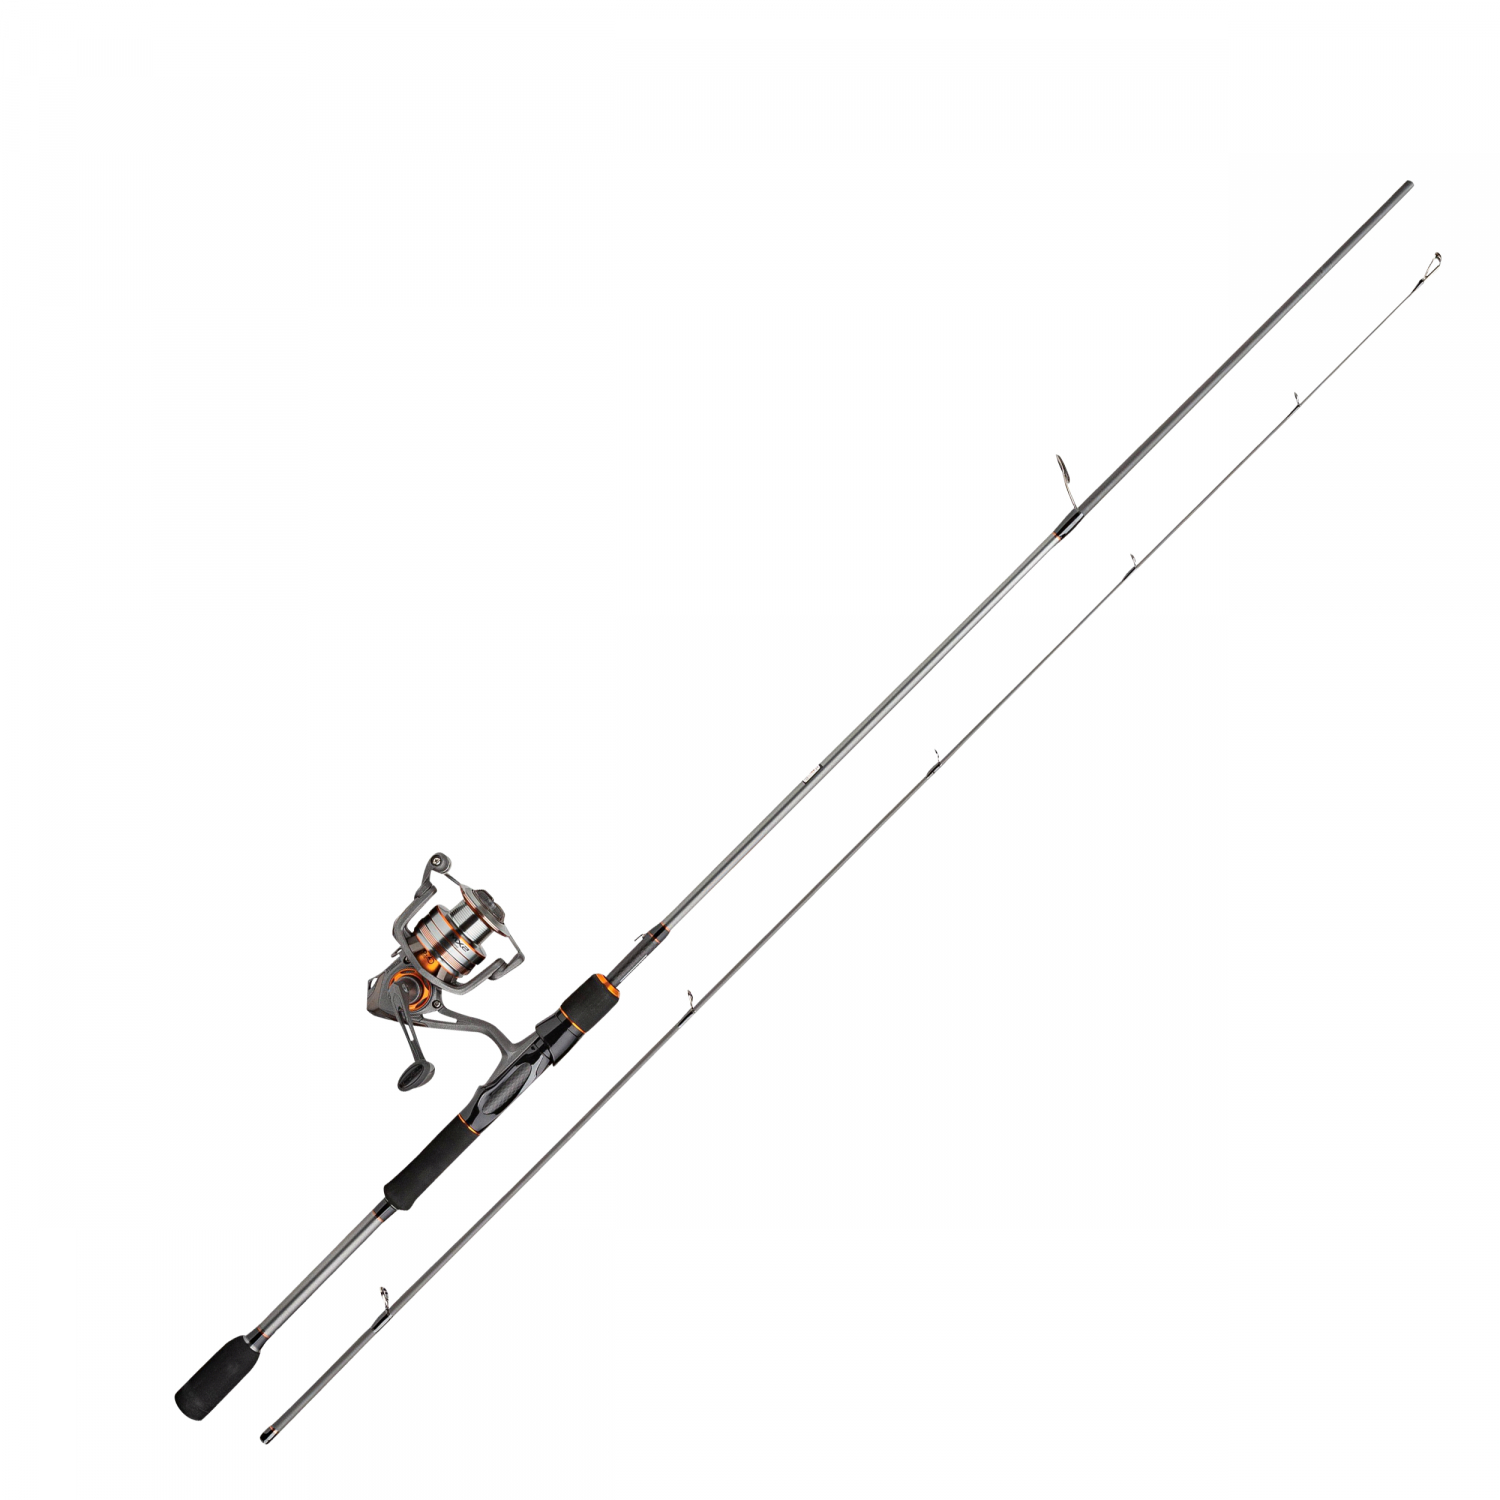 https://images.askari-sport.com/en/product/1/large/mitchell-spinning-combos-traxx-mx2-lure-1647558136.jpg